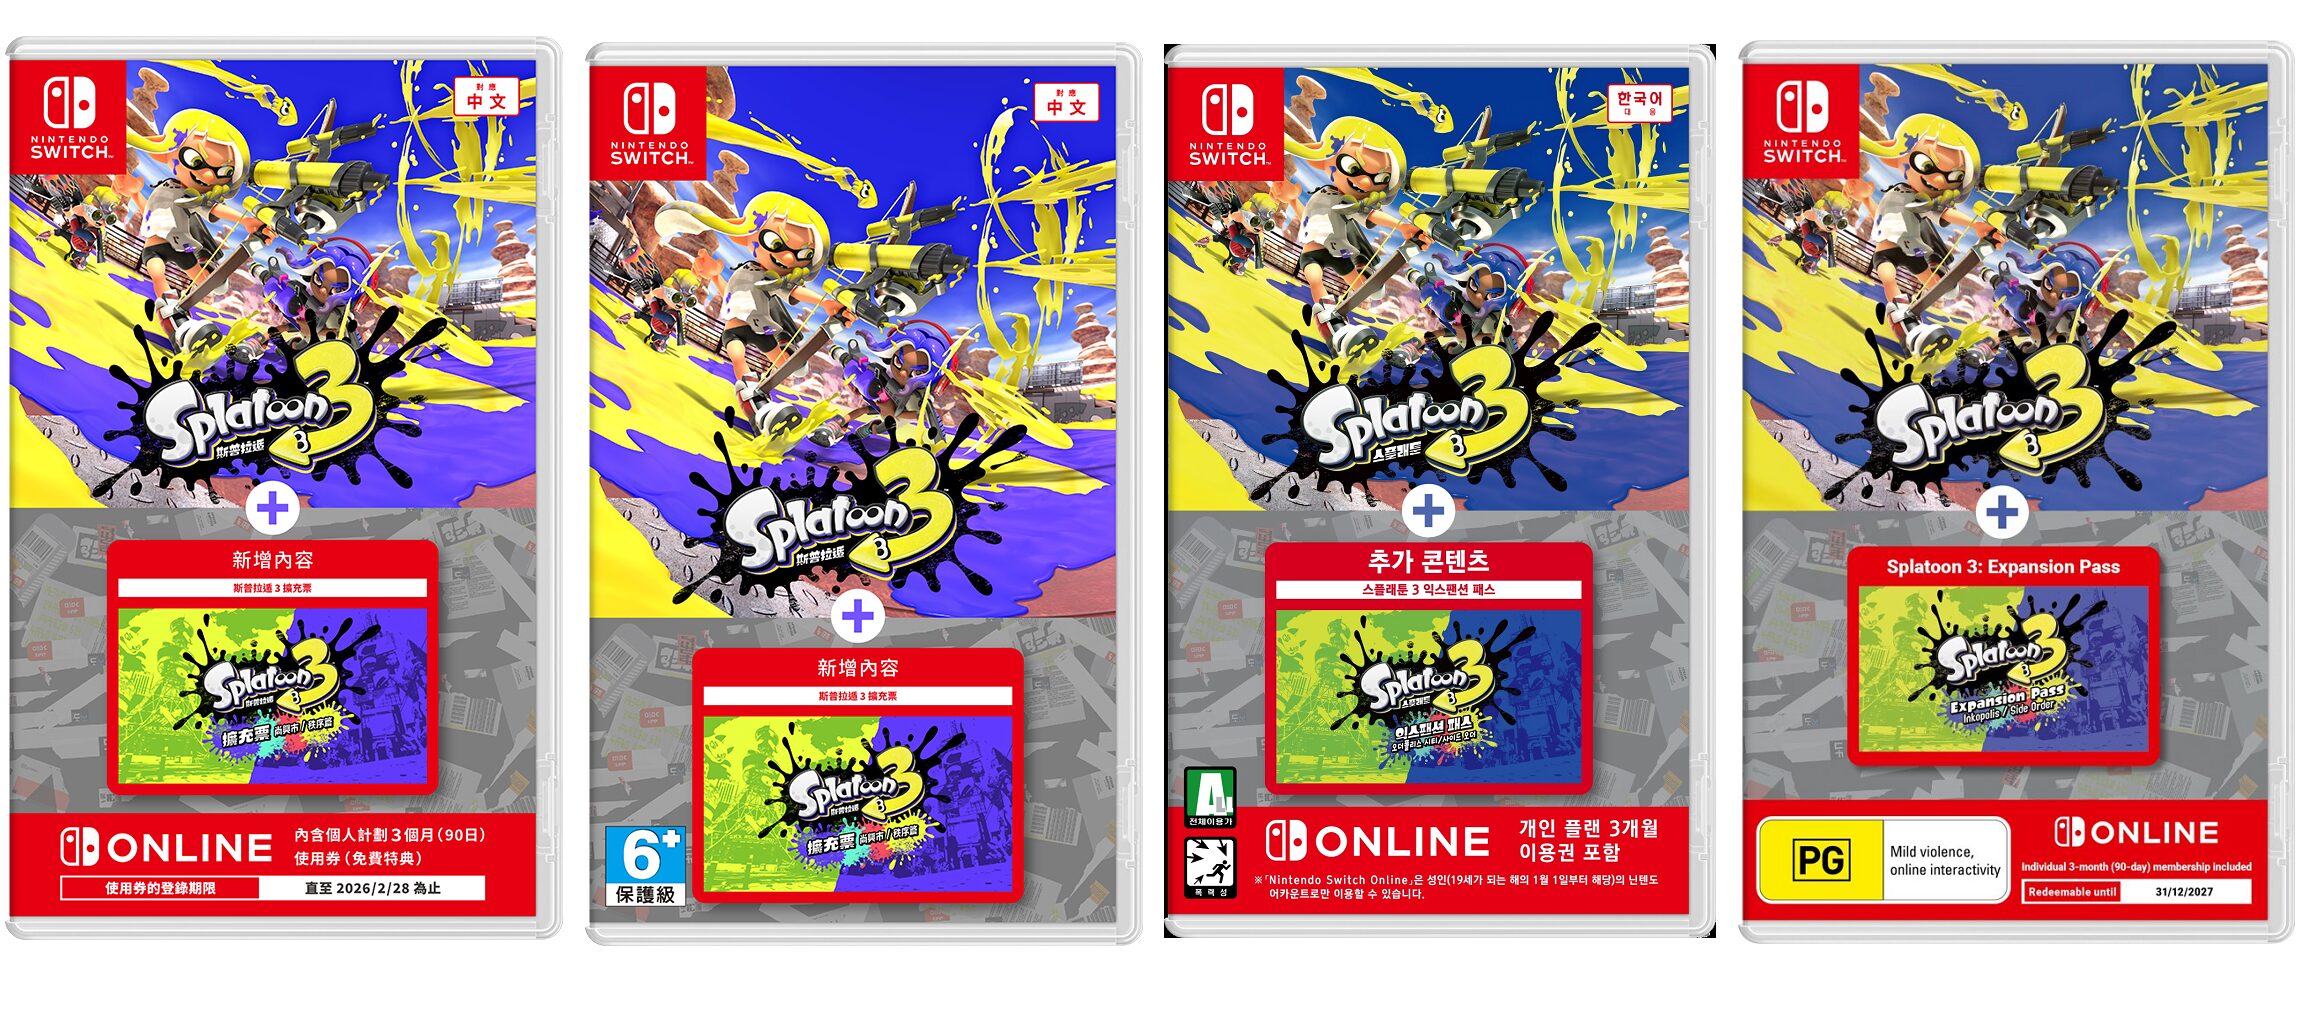 splatoon-3-for-nintendo-switch-expansion-pass-physical-release-announce-in-korea11